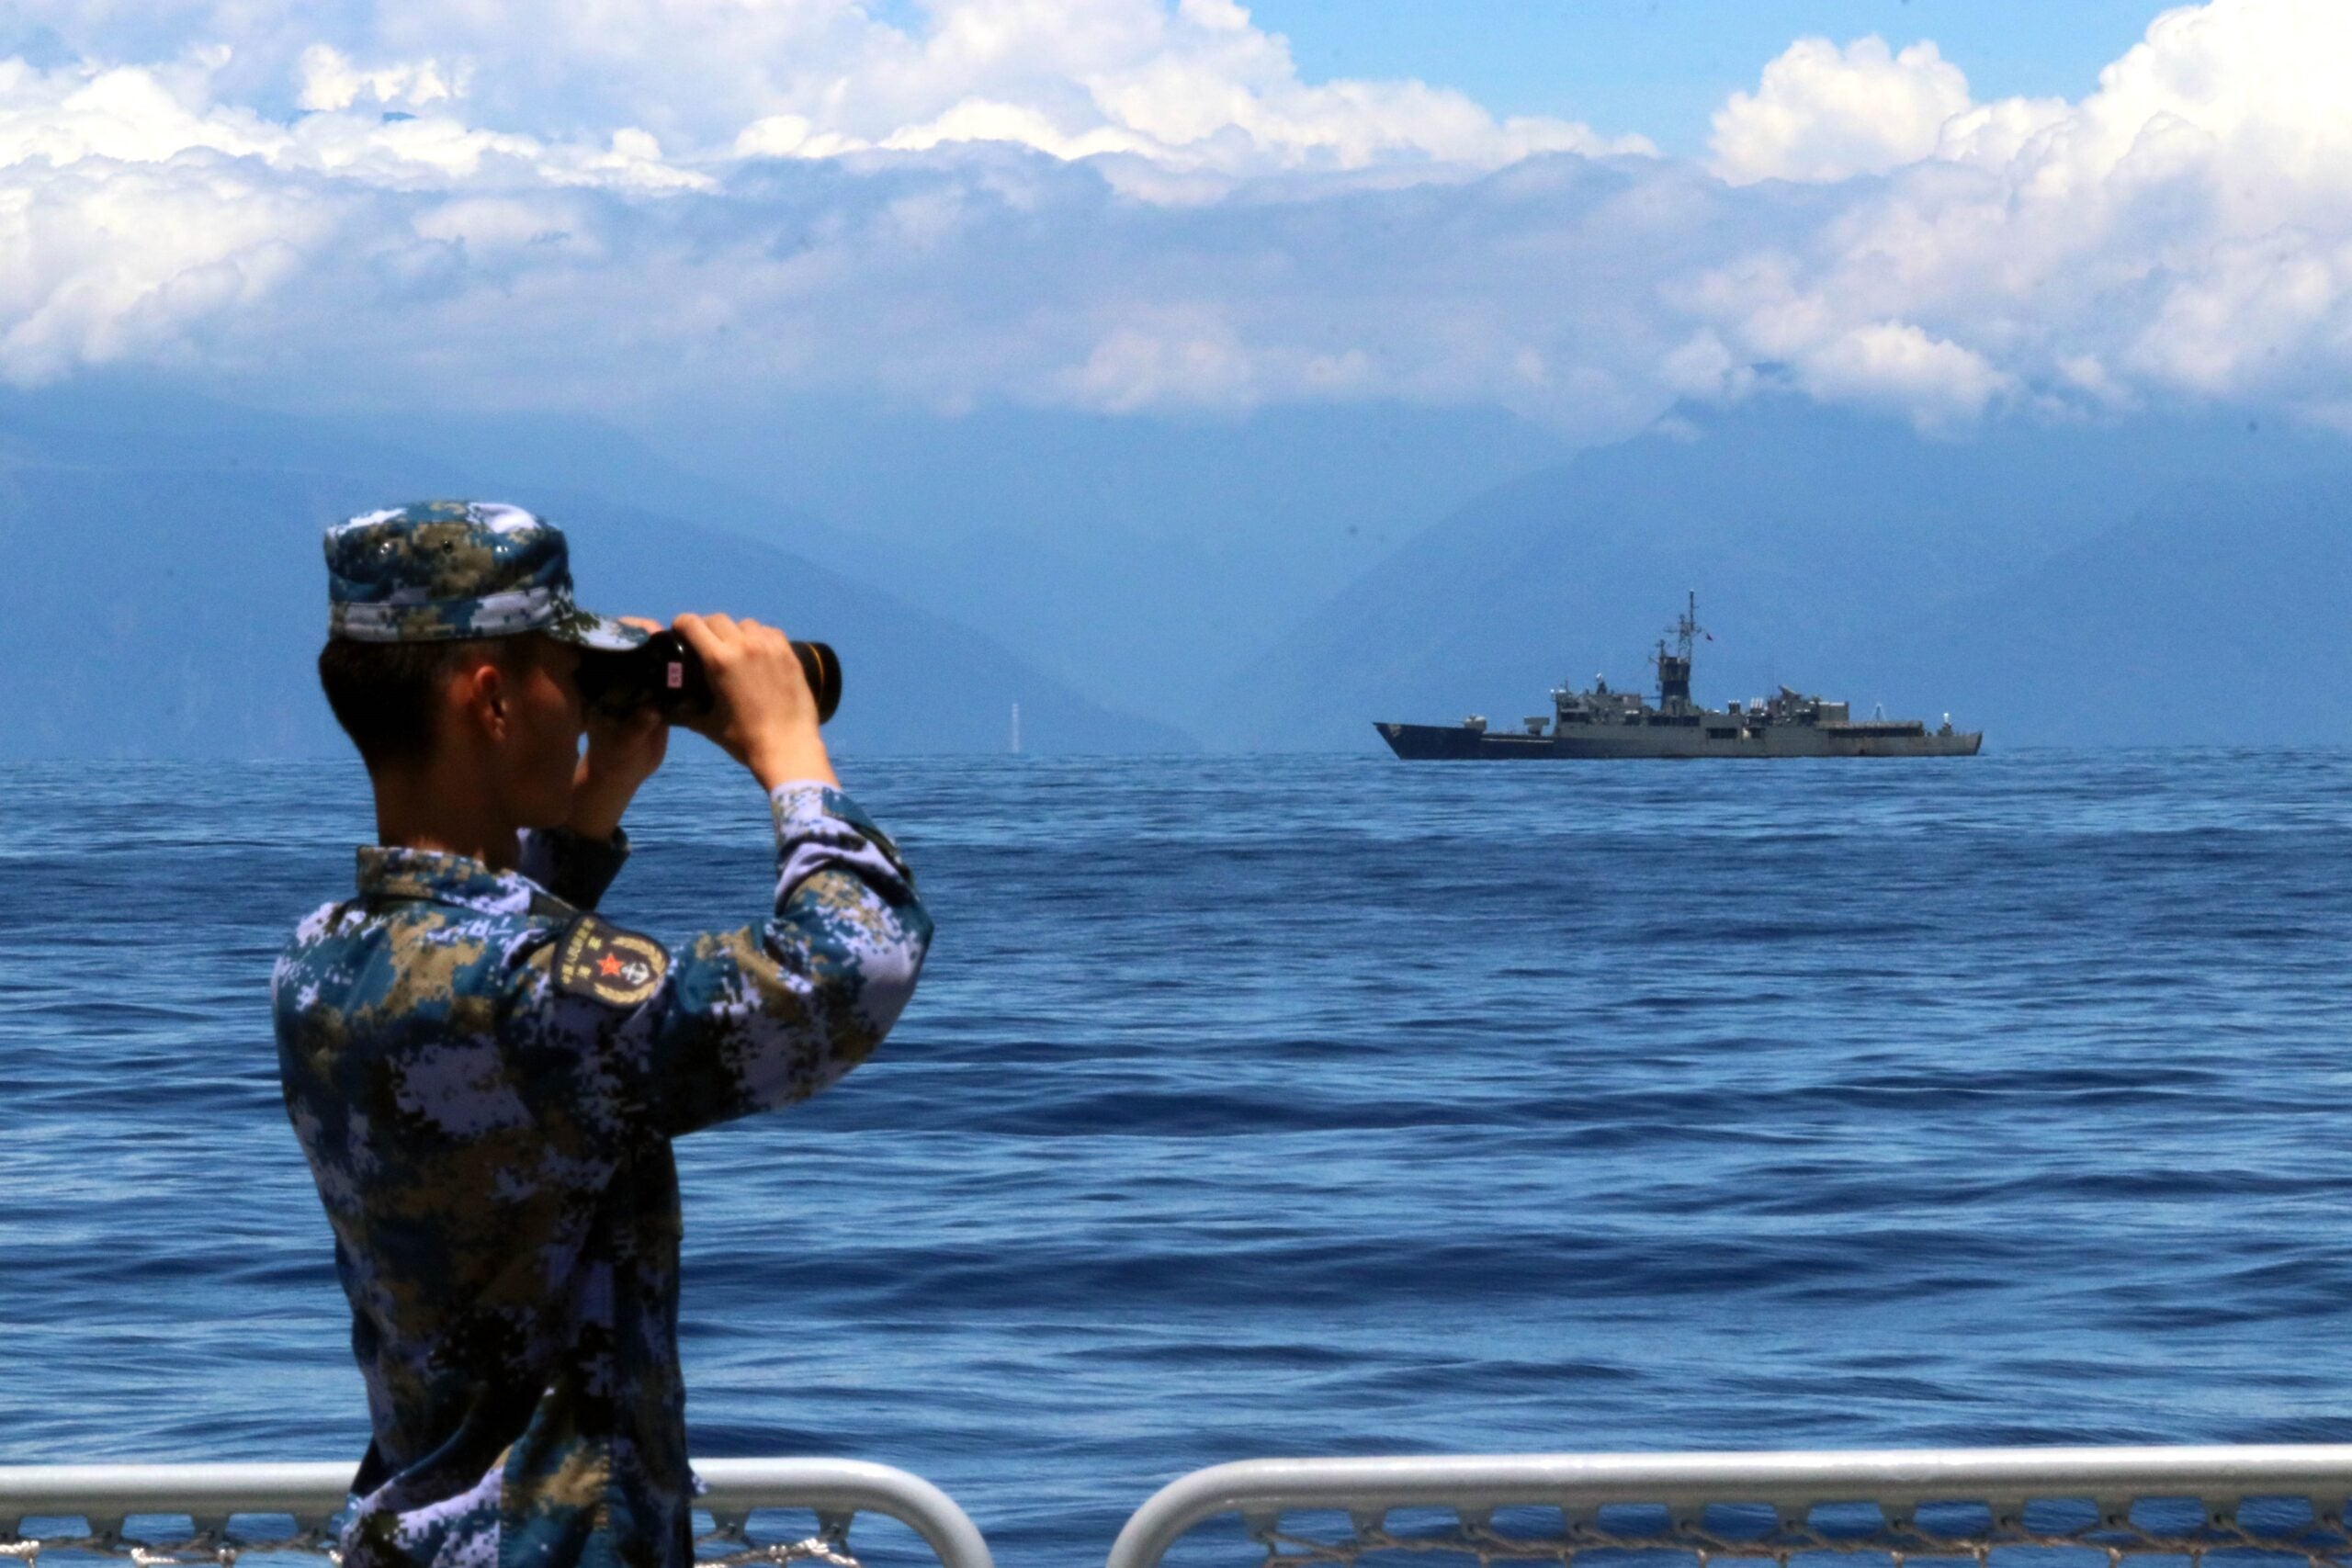 A soldier looks through binoculars during combat exercises and training of the navy of the Eastern Theater Command of the Chinese People's Liberation Army PLA in the waters around the Taiwan Island, Aug. 5, 2022. The Eastern Theater Command on Friday continued joint combat exercises and training in the waters and airspace around the Taiwan Island. (Photo by Lin Jian/Xinhua via Getty Images)